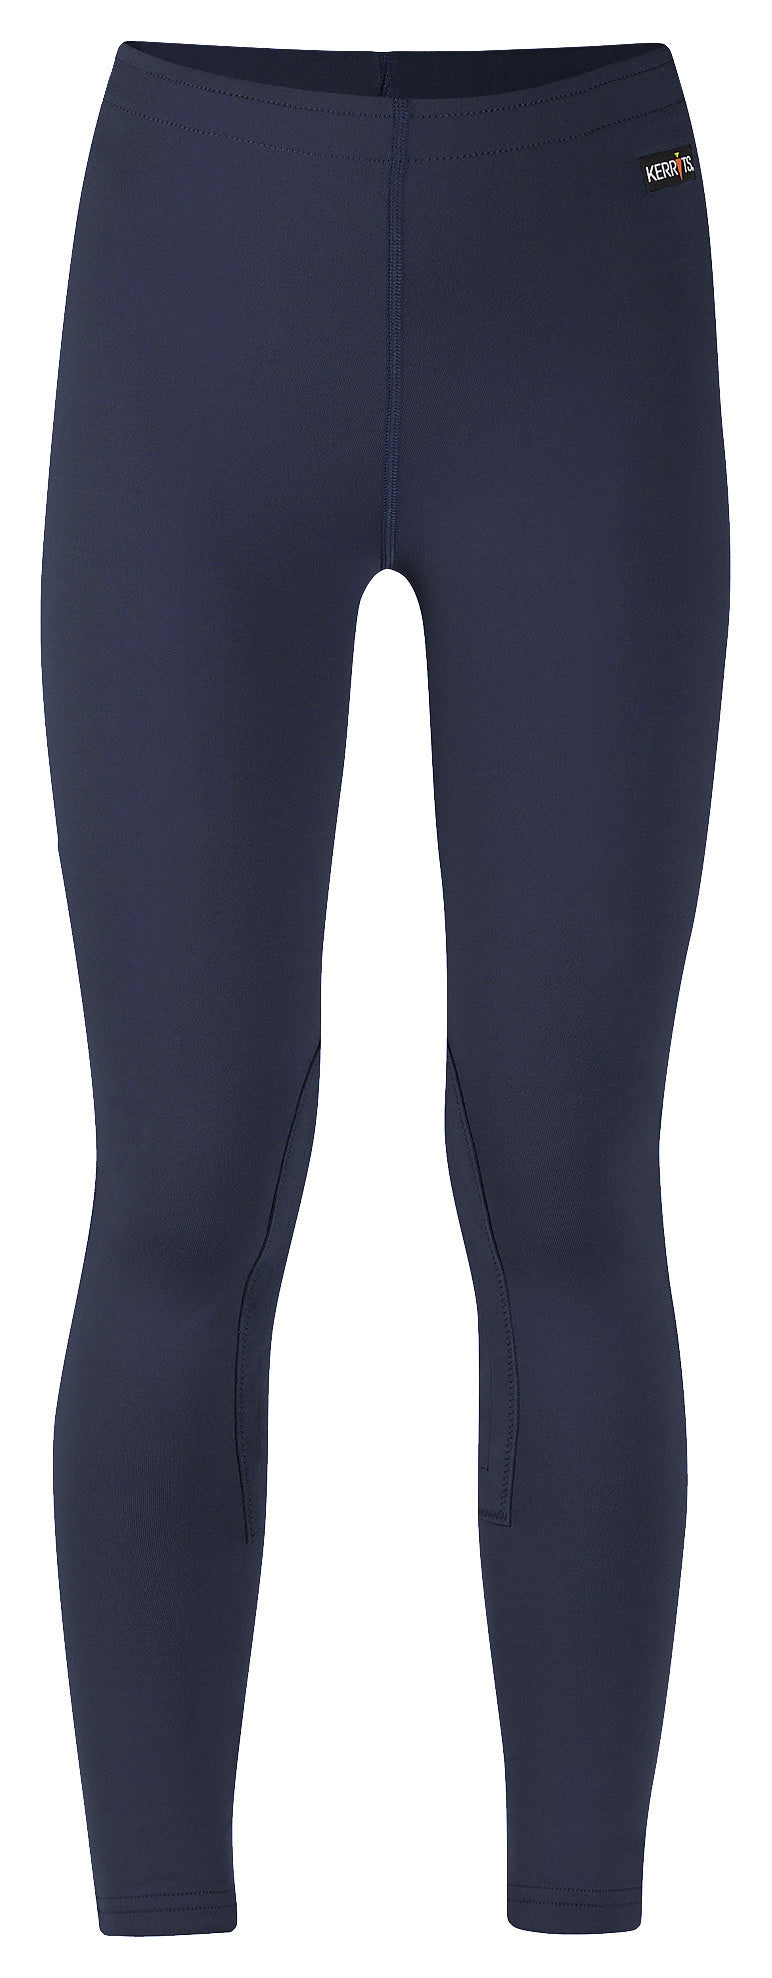 Kerrits Kids Sprout Starter Tights - SALE